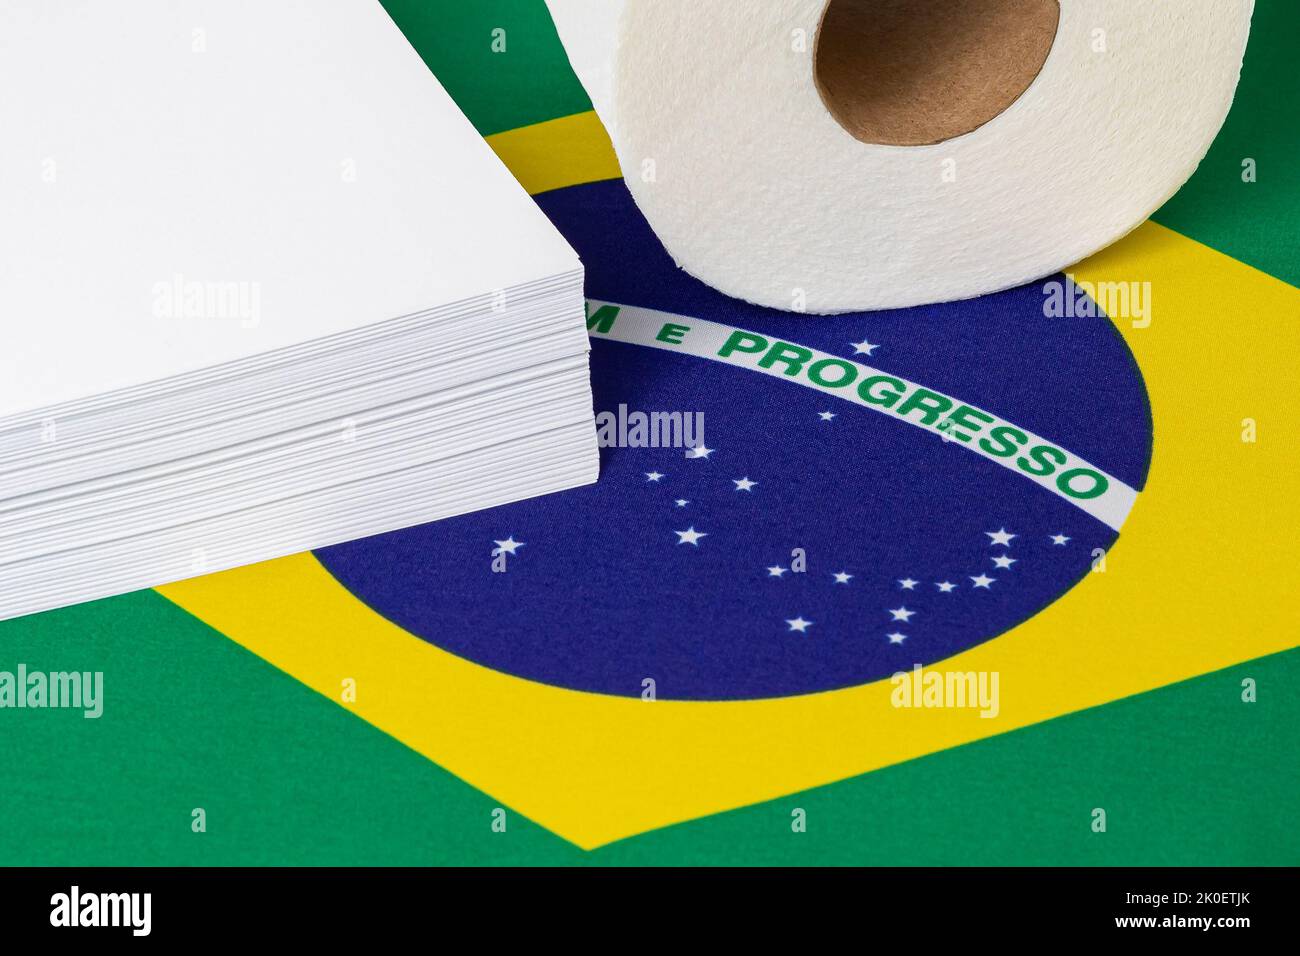 Ream of printer paper, toilet paper and Brazil flag. Paper products industry, trade and manufacturing concept Stock Photo